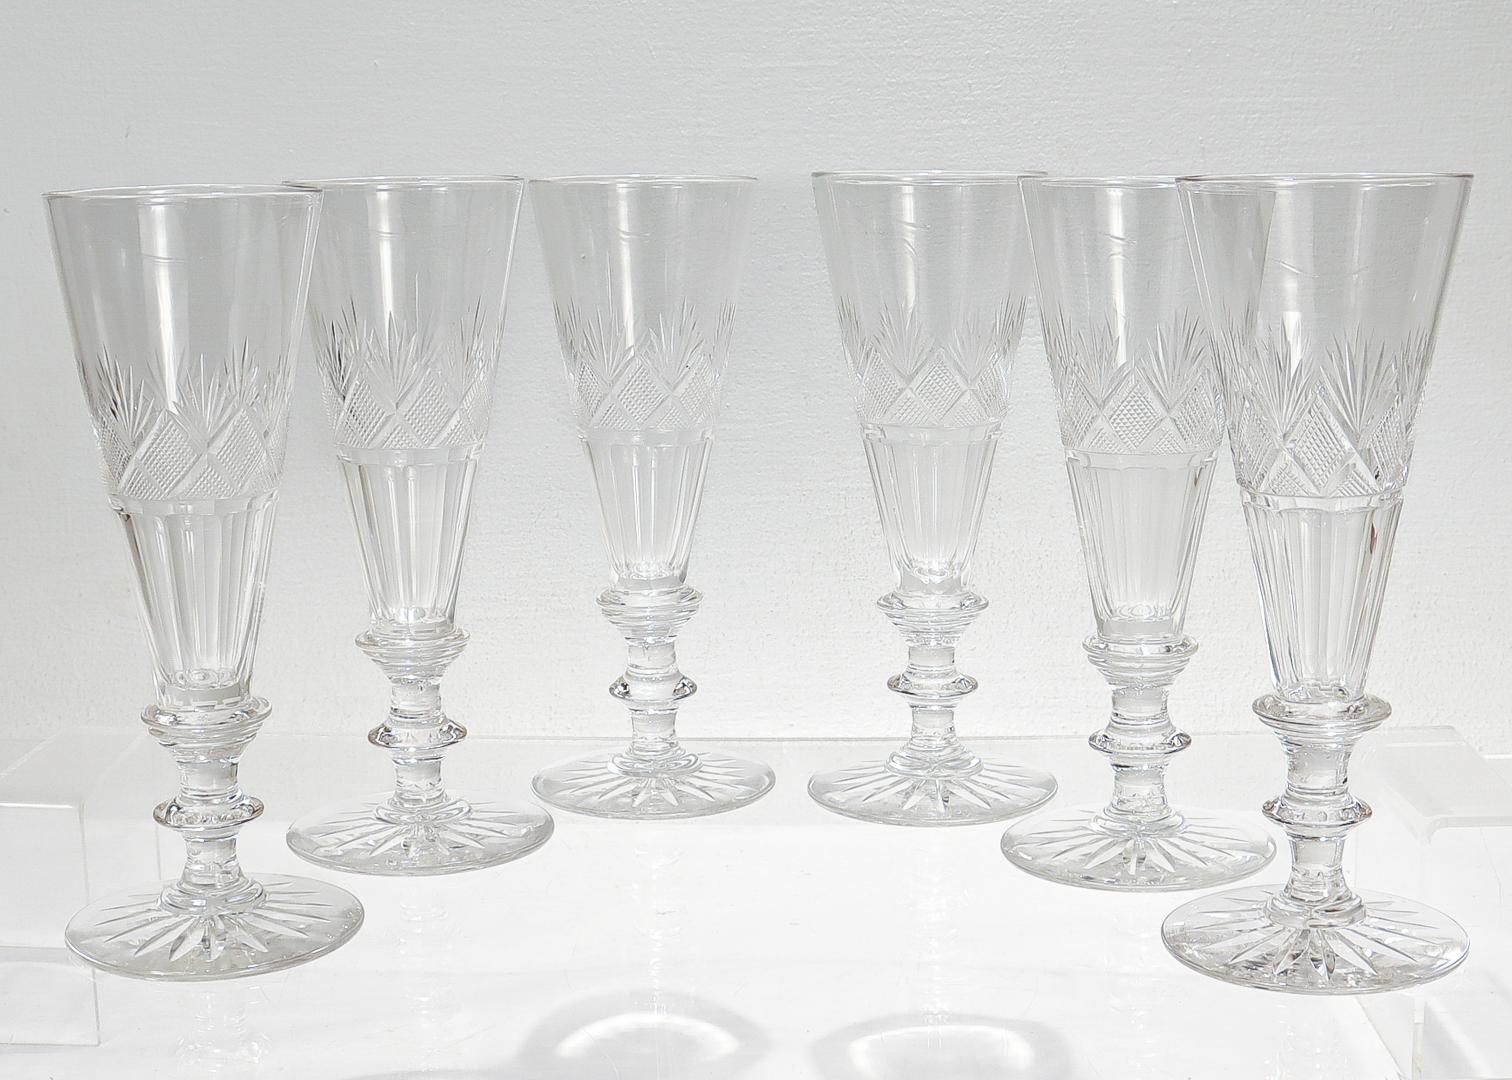 Set of 6 Antique 19th Century Cut Glass Champagne Flutes Attributed to Bakewell In Good Condition For Sale In Philadelphia, PA